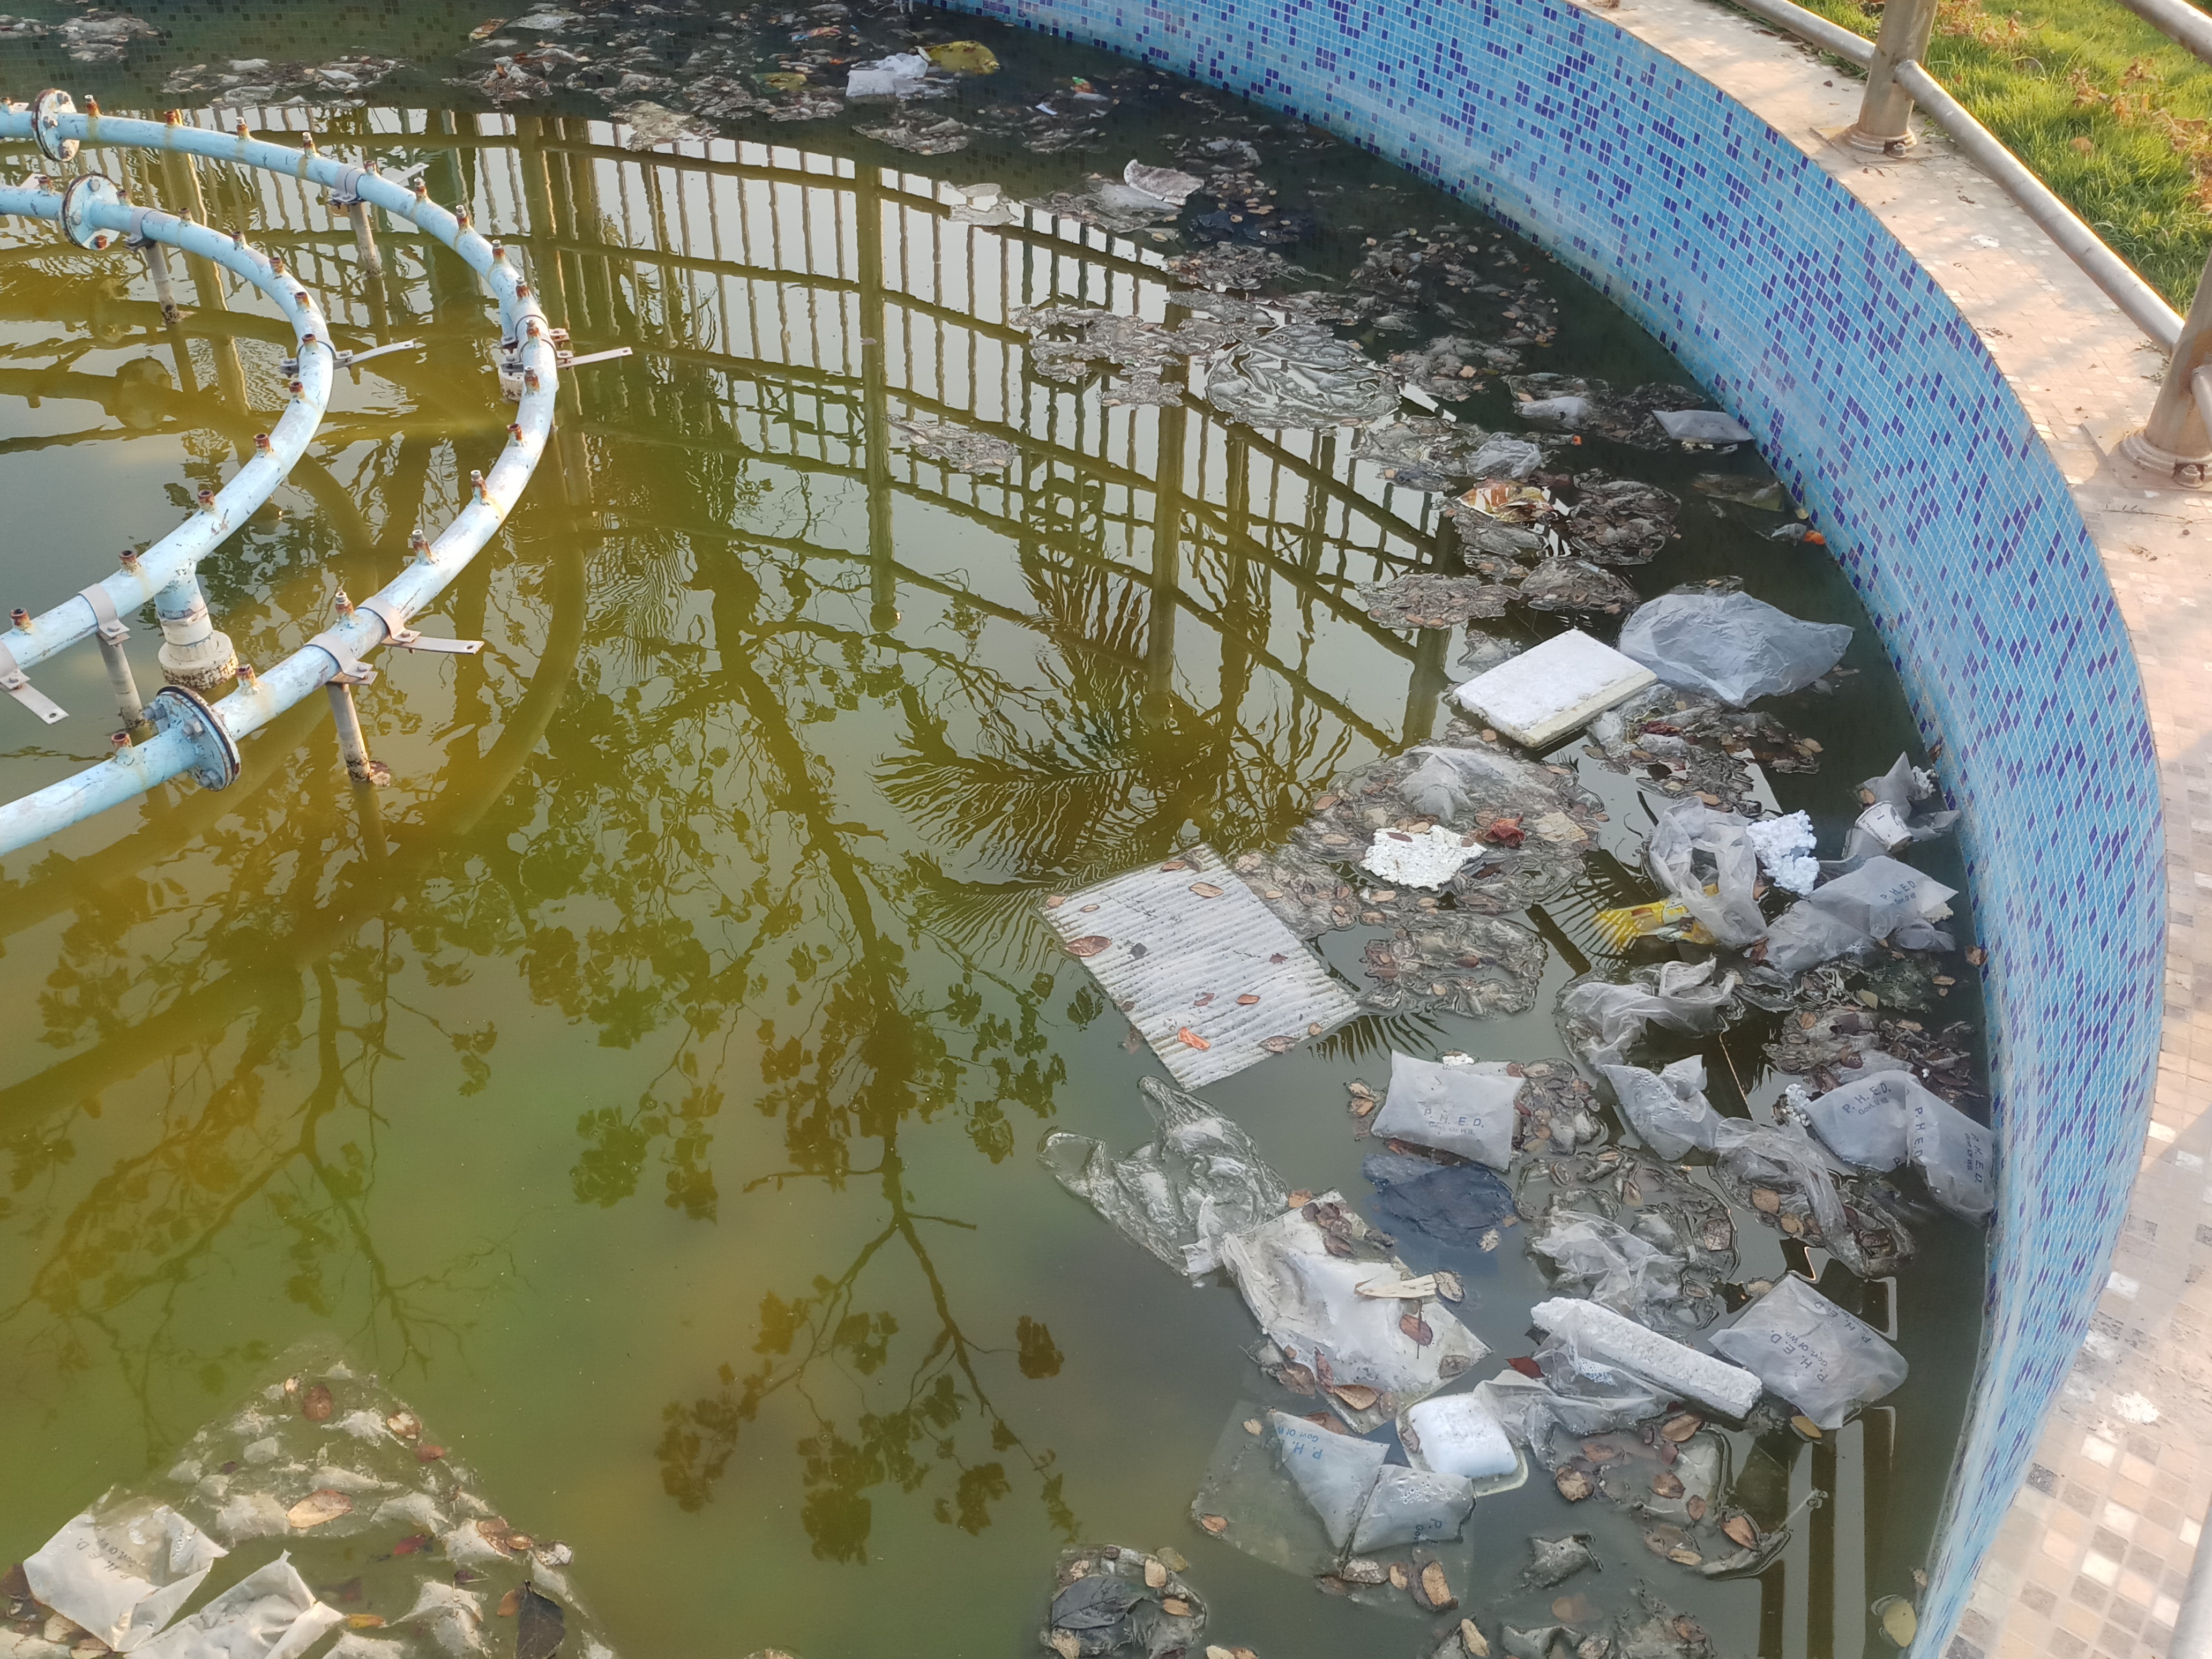 Plastic packets and other waste are found strewn in the fountains which are in disuse. (Pic courtesy: Gurvinder Singh)